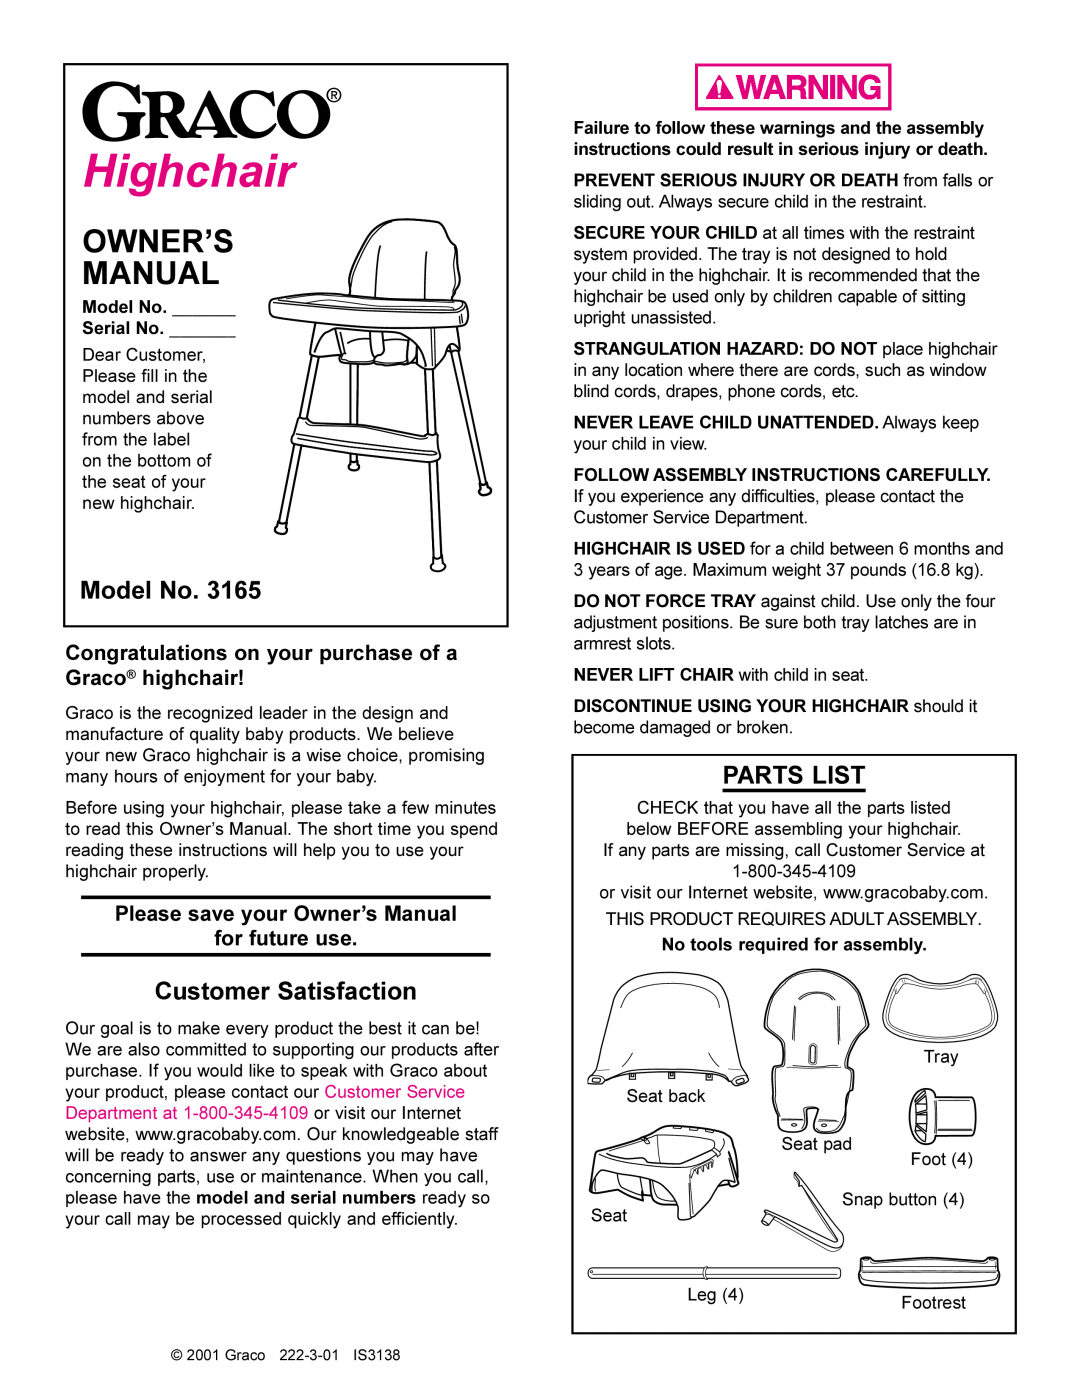 Graco 3165 owner manual Model No, Customer Satisfaction, Parts List, Congratulations on your purchase of a Graco highchair 